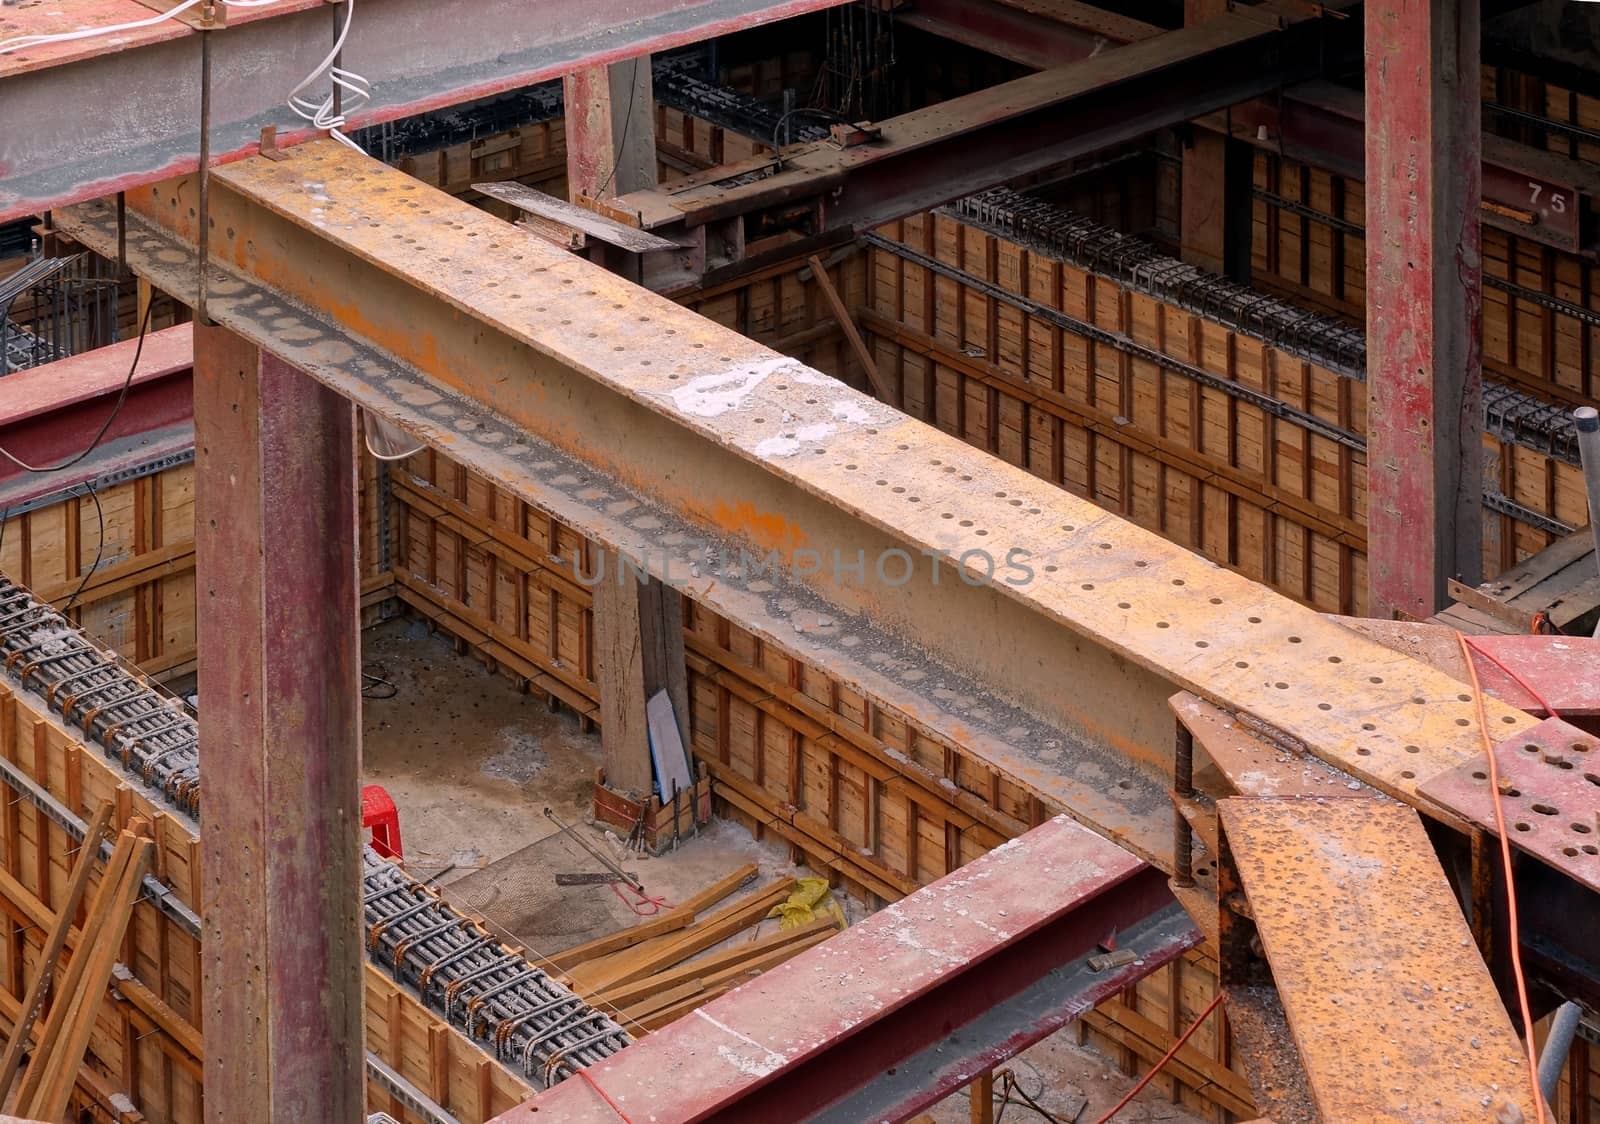 A large underground construction site with strong pillars and girders